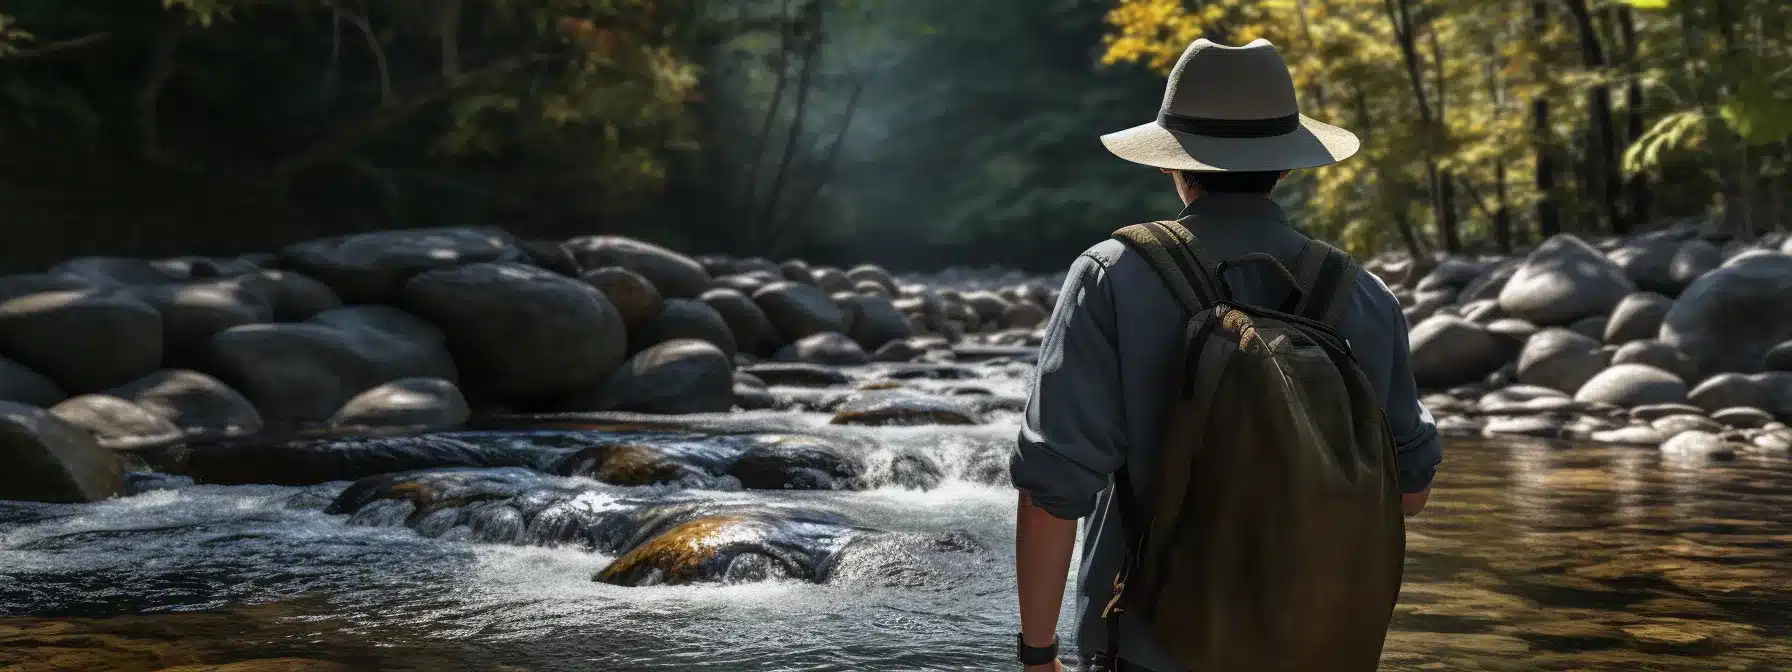 A Person Wearing An Explorer Hat, Navigating Across Stepping Stones In A Rushing River.